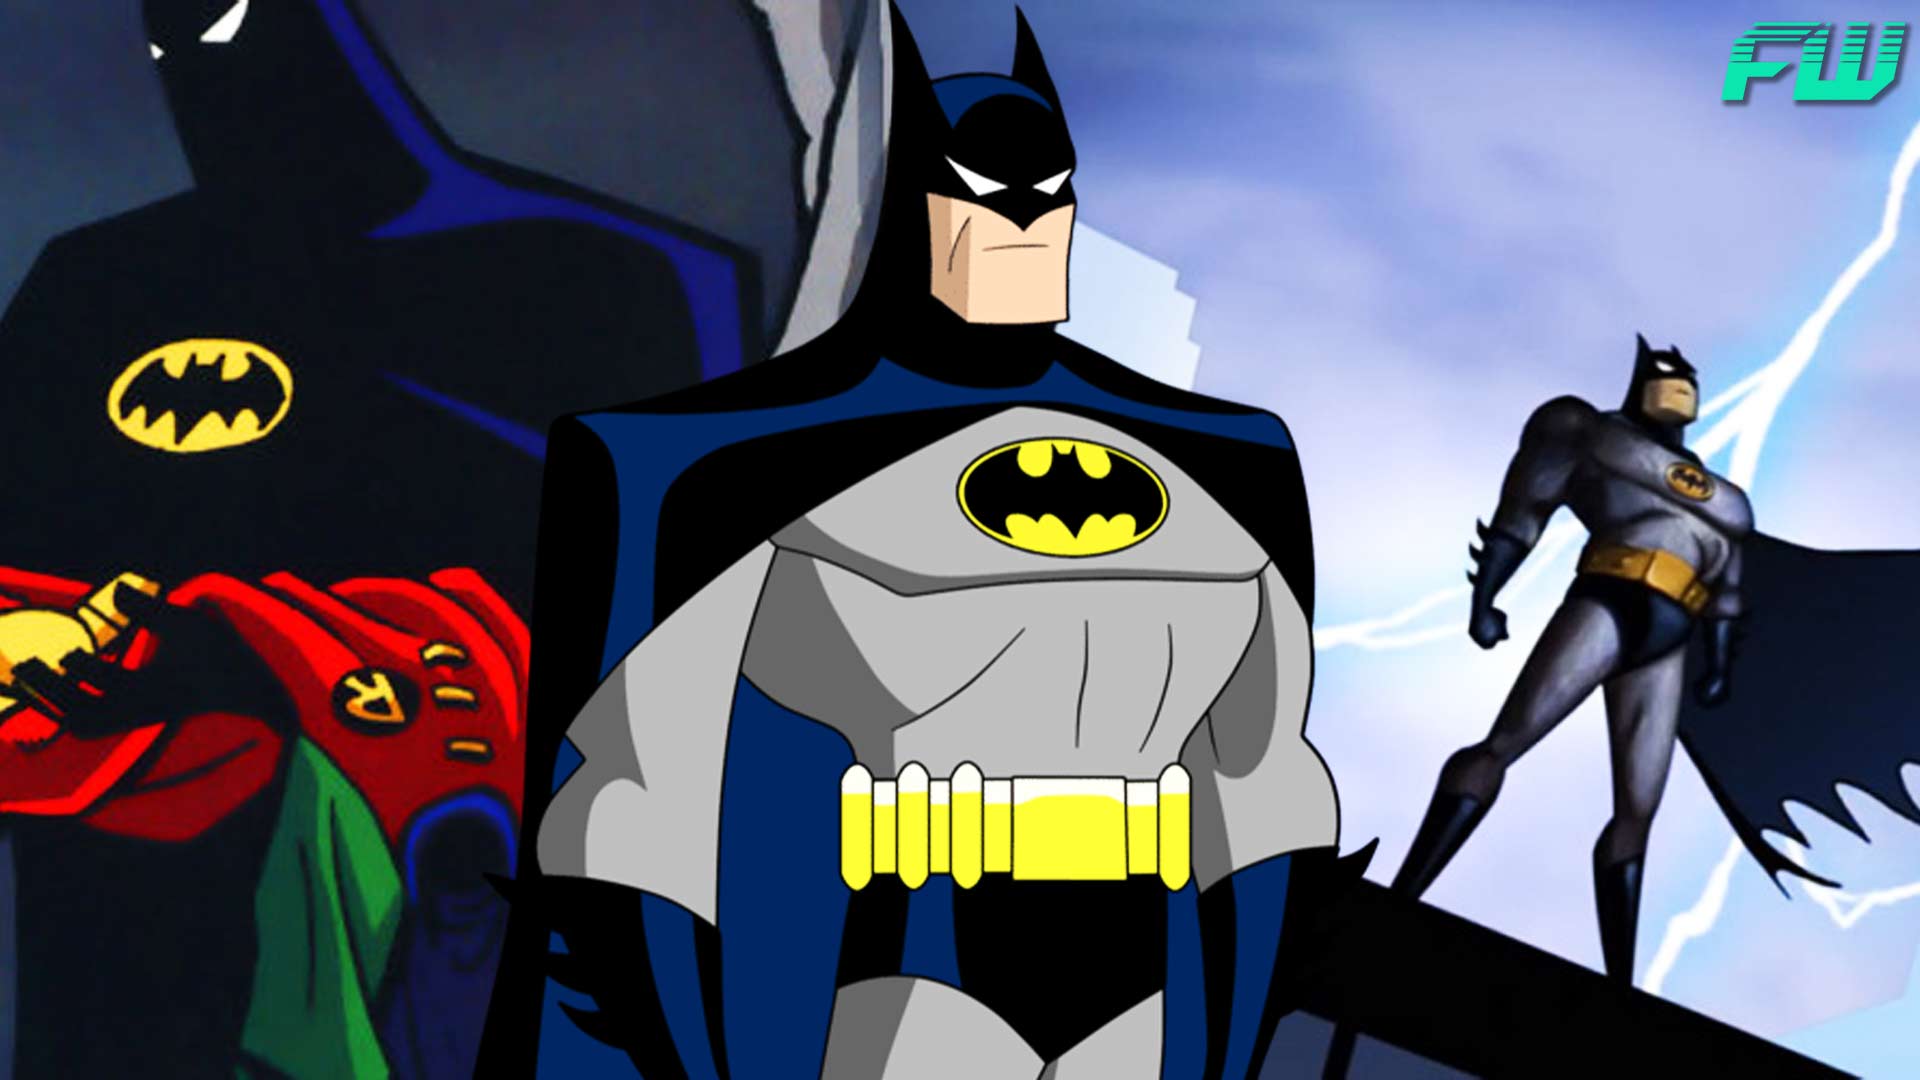 What Happened After Batman The Animated Series’ Final Episode?